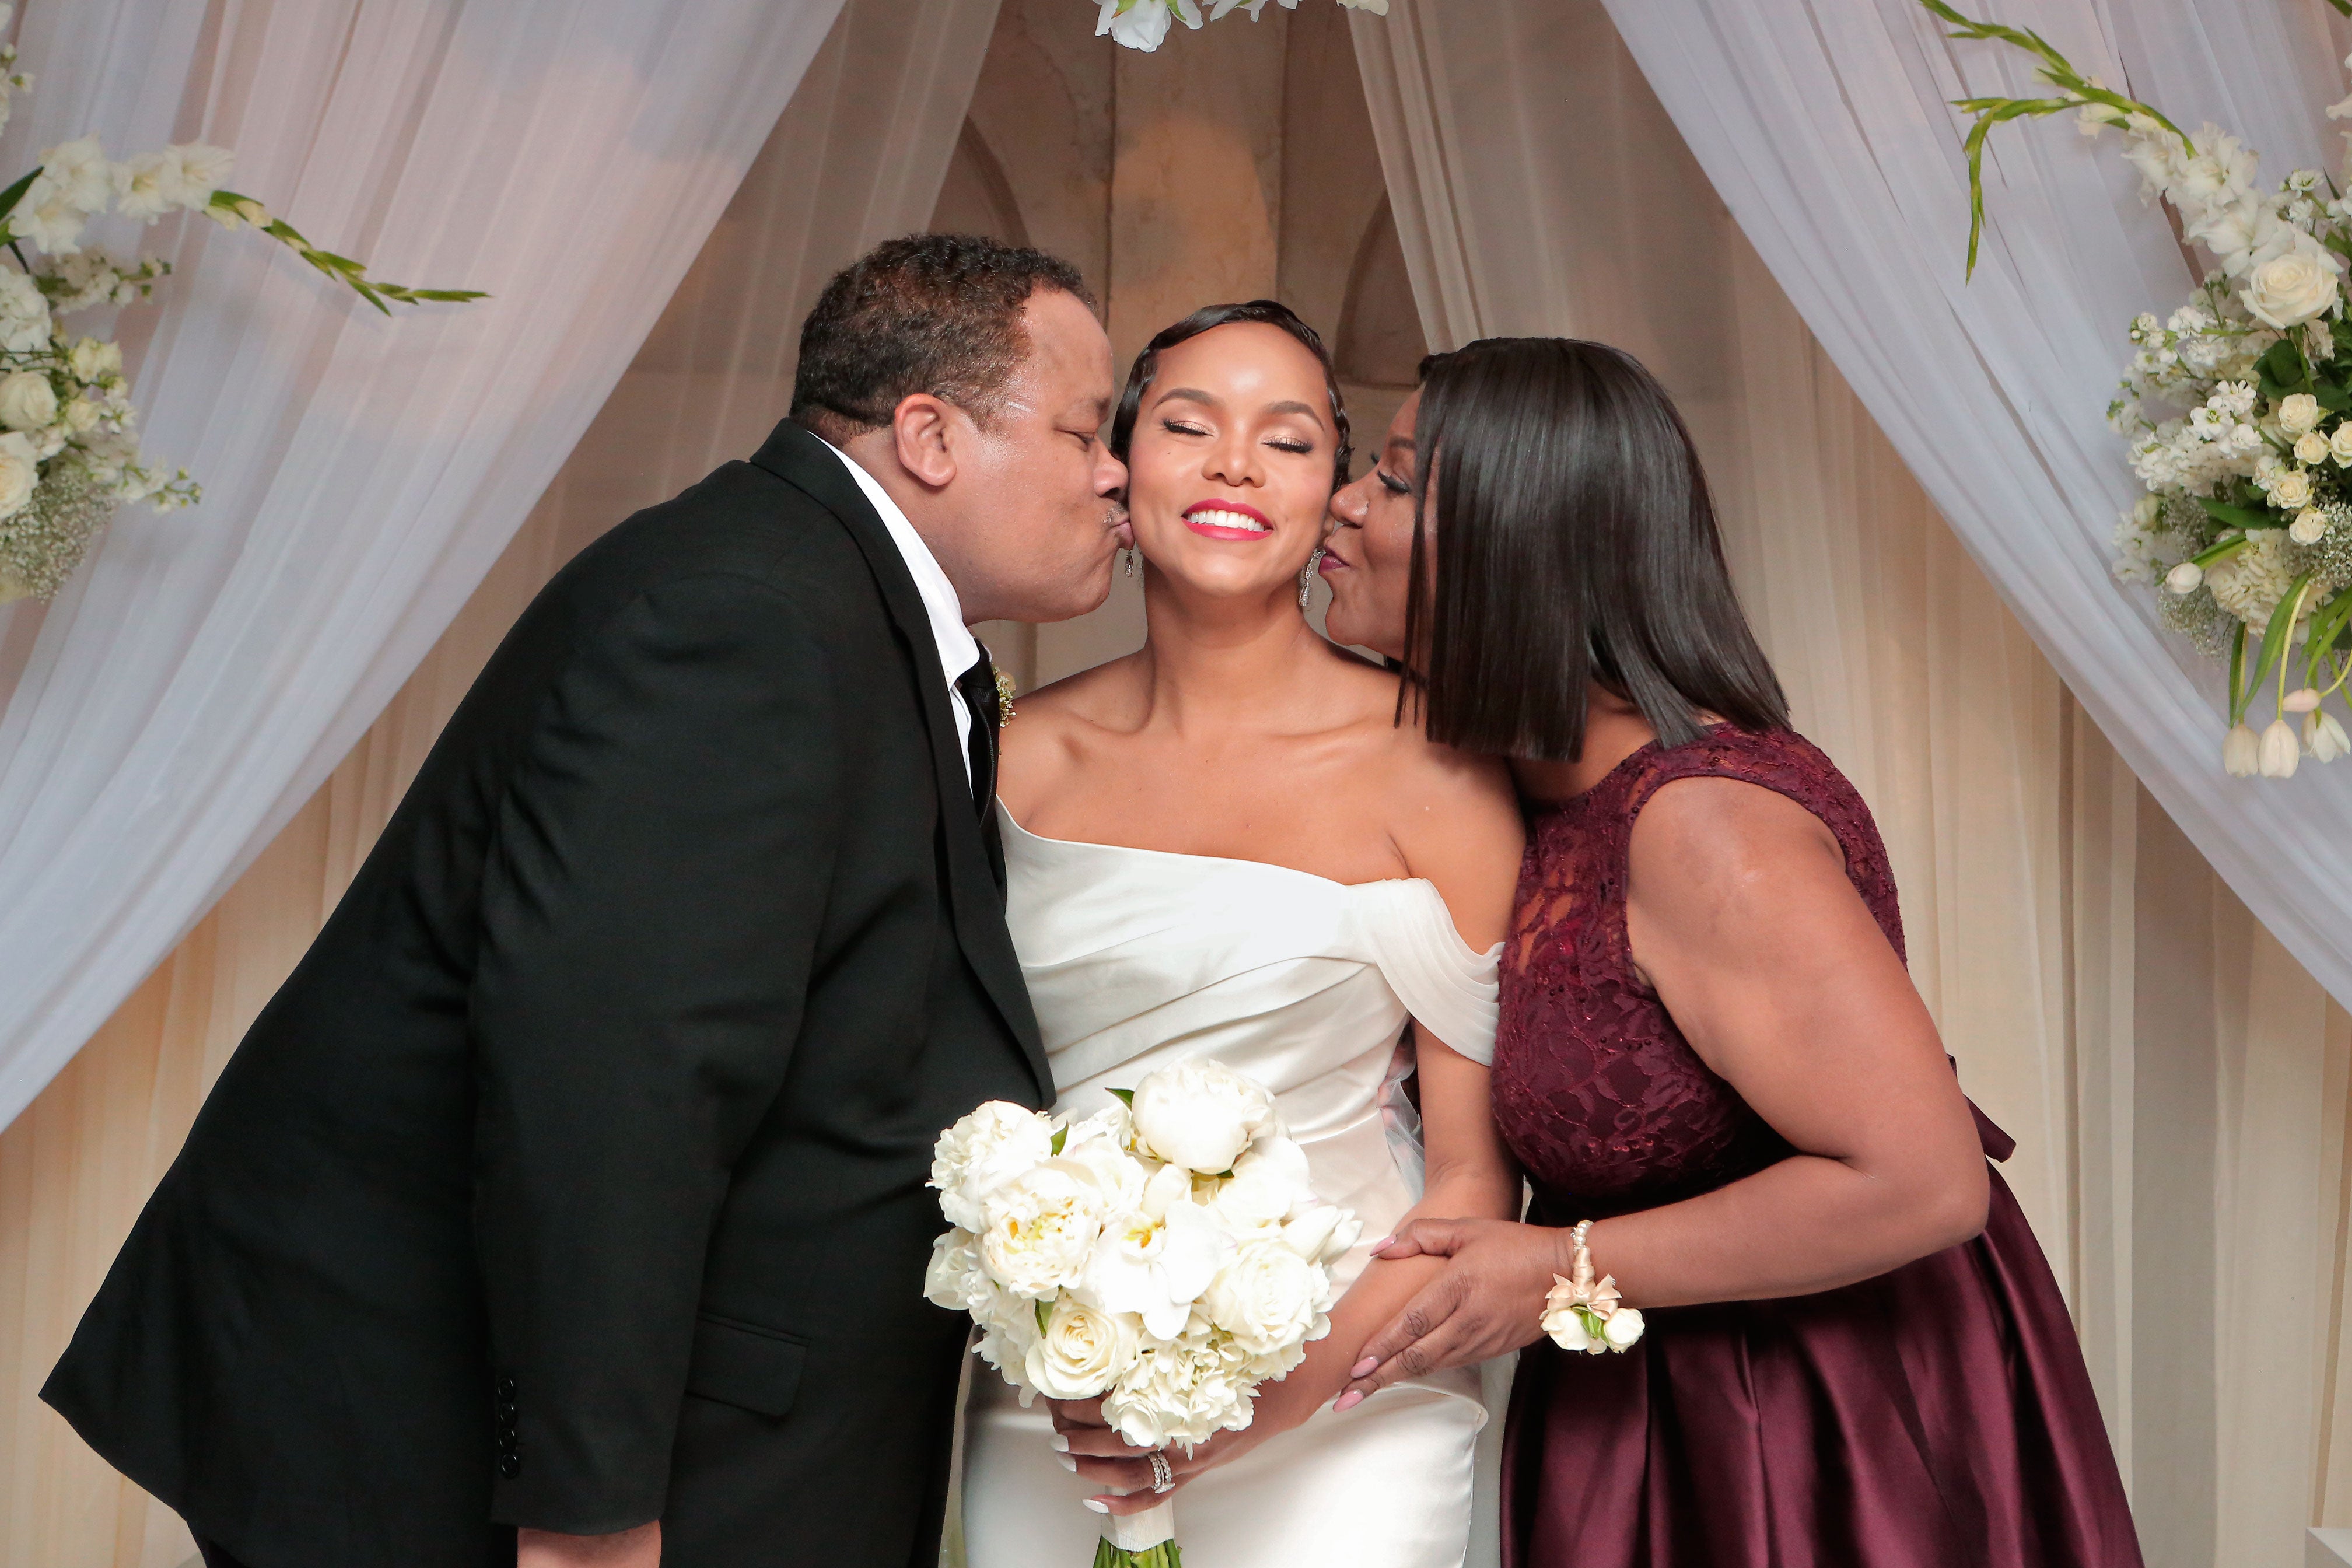 More Amazing Photos From LeToya Luckett's Wedding Day You Didn't See
